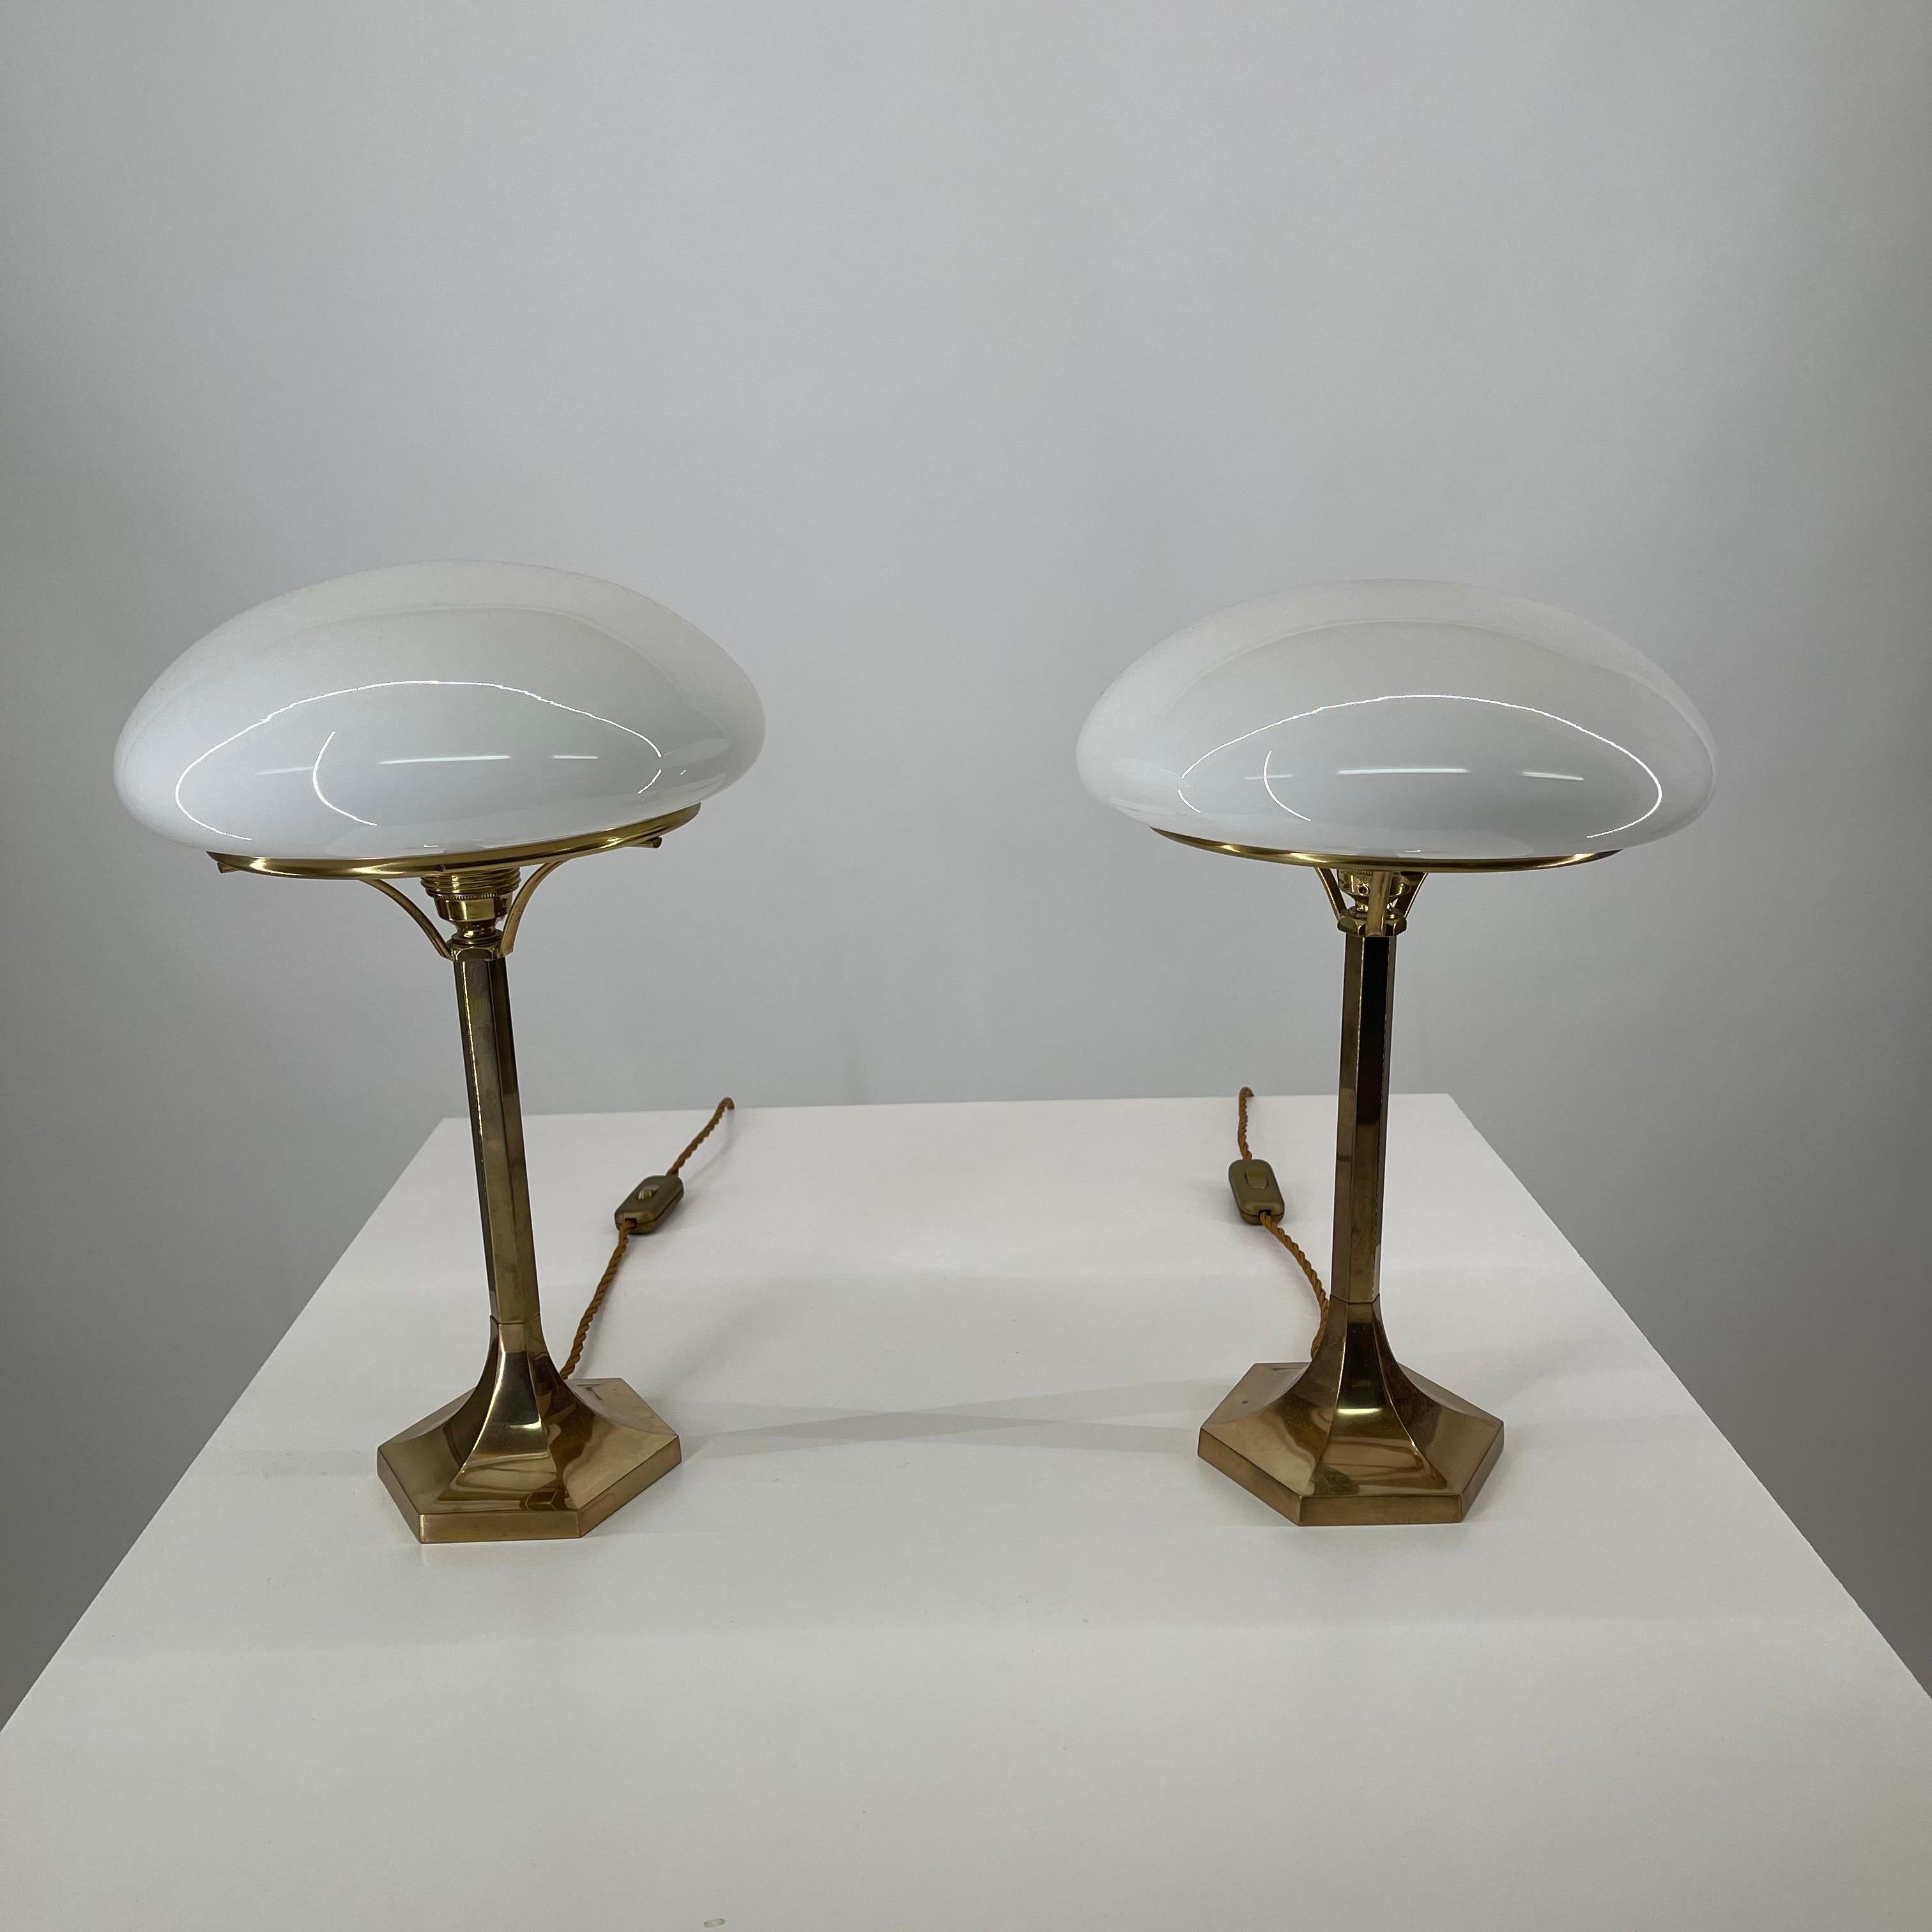 One of 7 Art Deco brass mushroom table lamps, Austria, 1970s. Rewired with cloth cable.